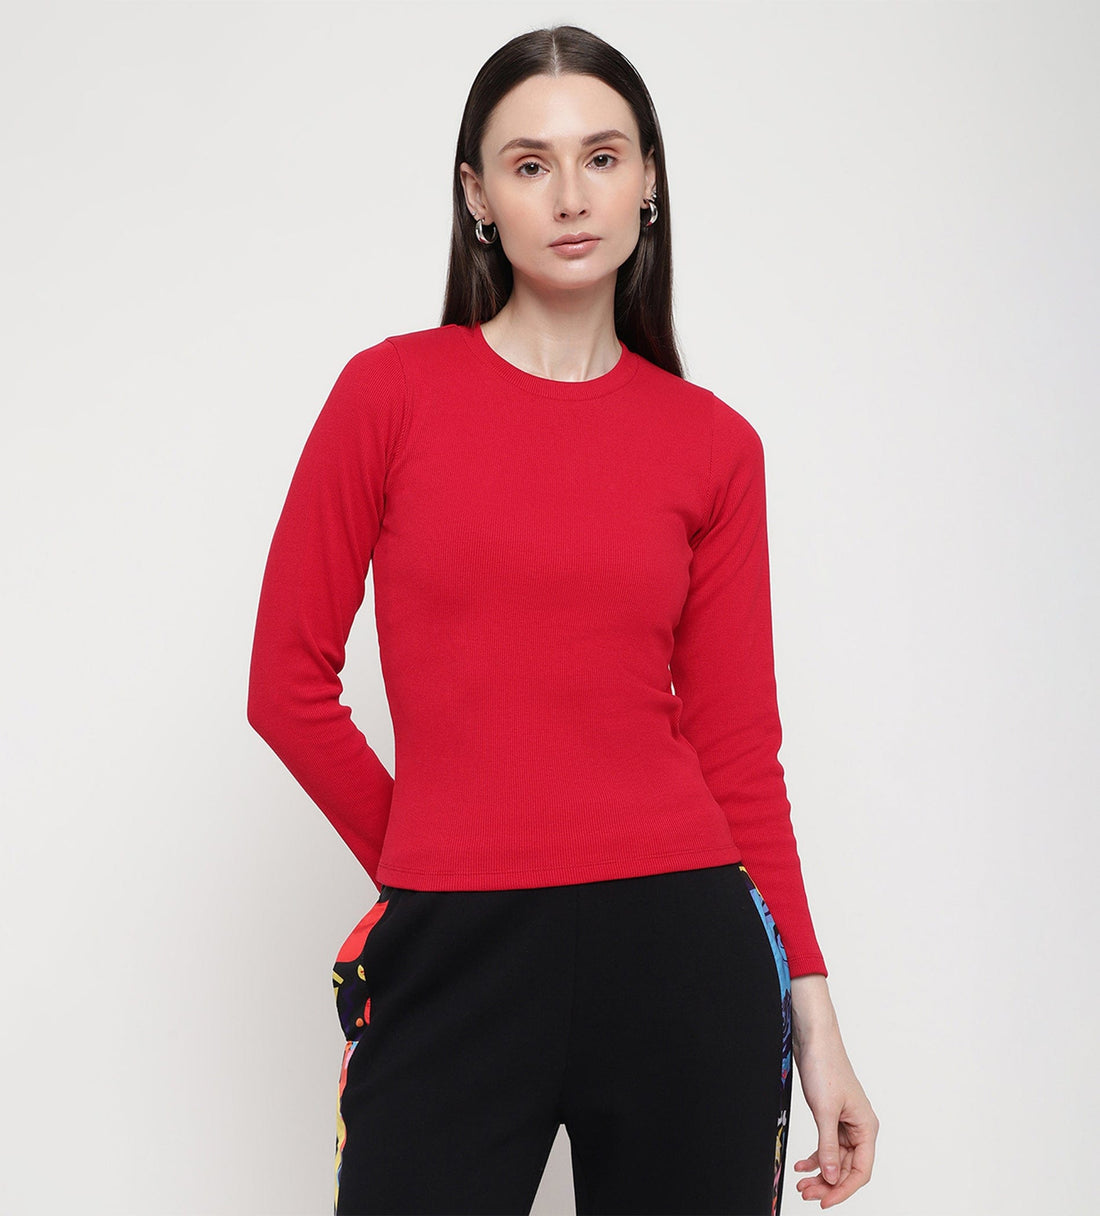 Tanks & Tops Tops Red Rib Knit Top for Women